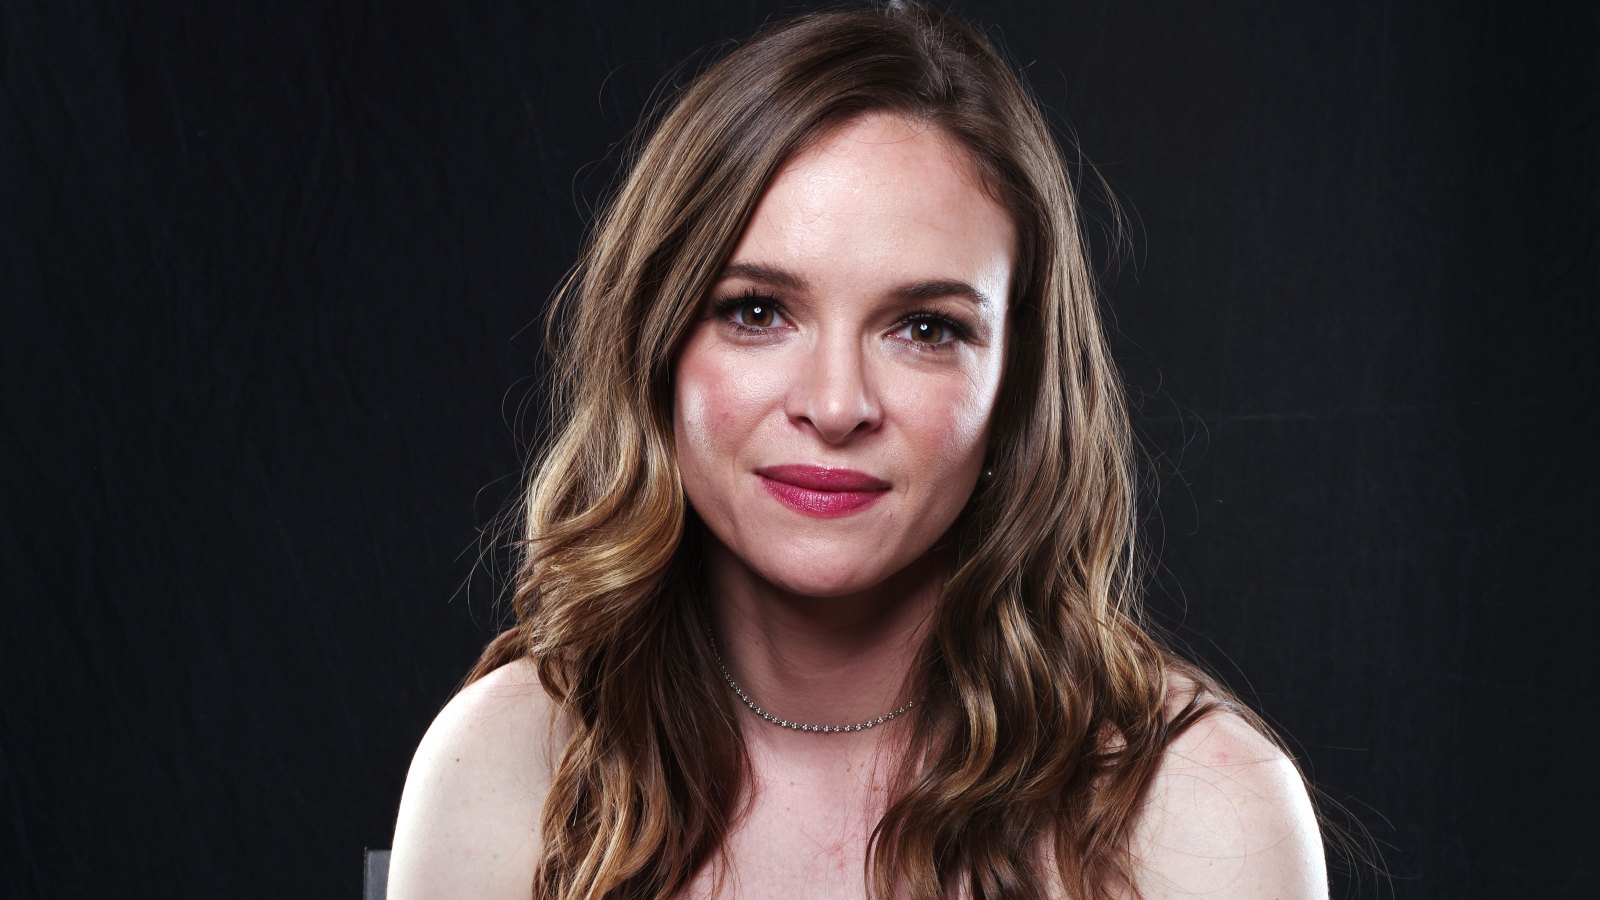 Danielle Panabaker Is Pregnant, Expecting Her First Child With Husband Hayes Robbins